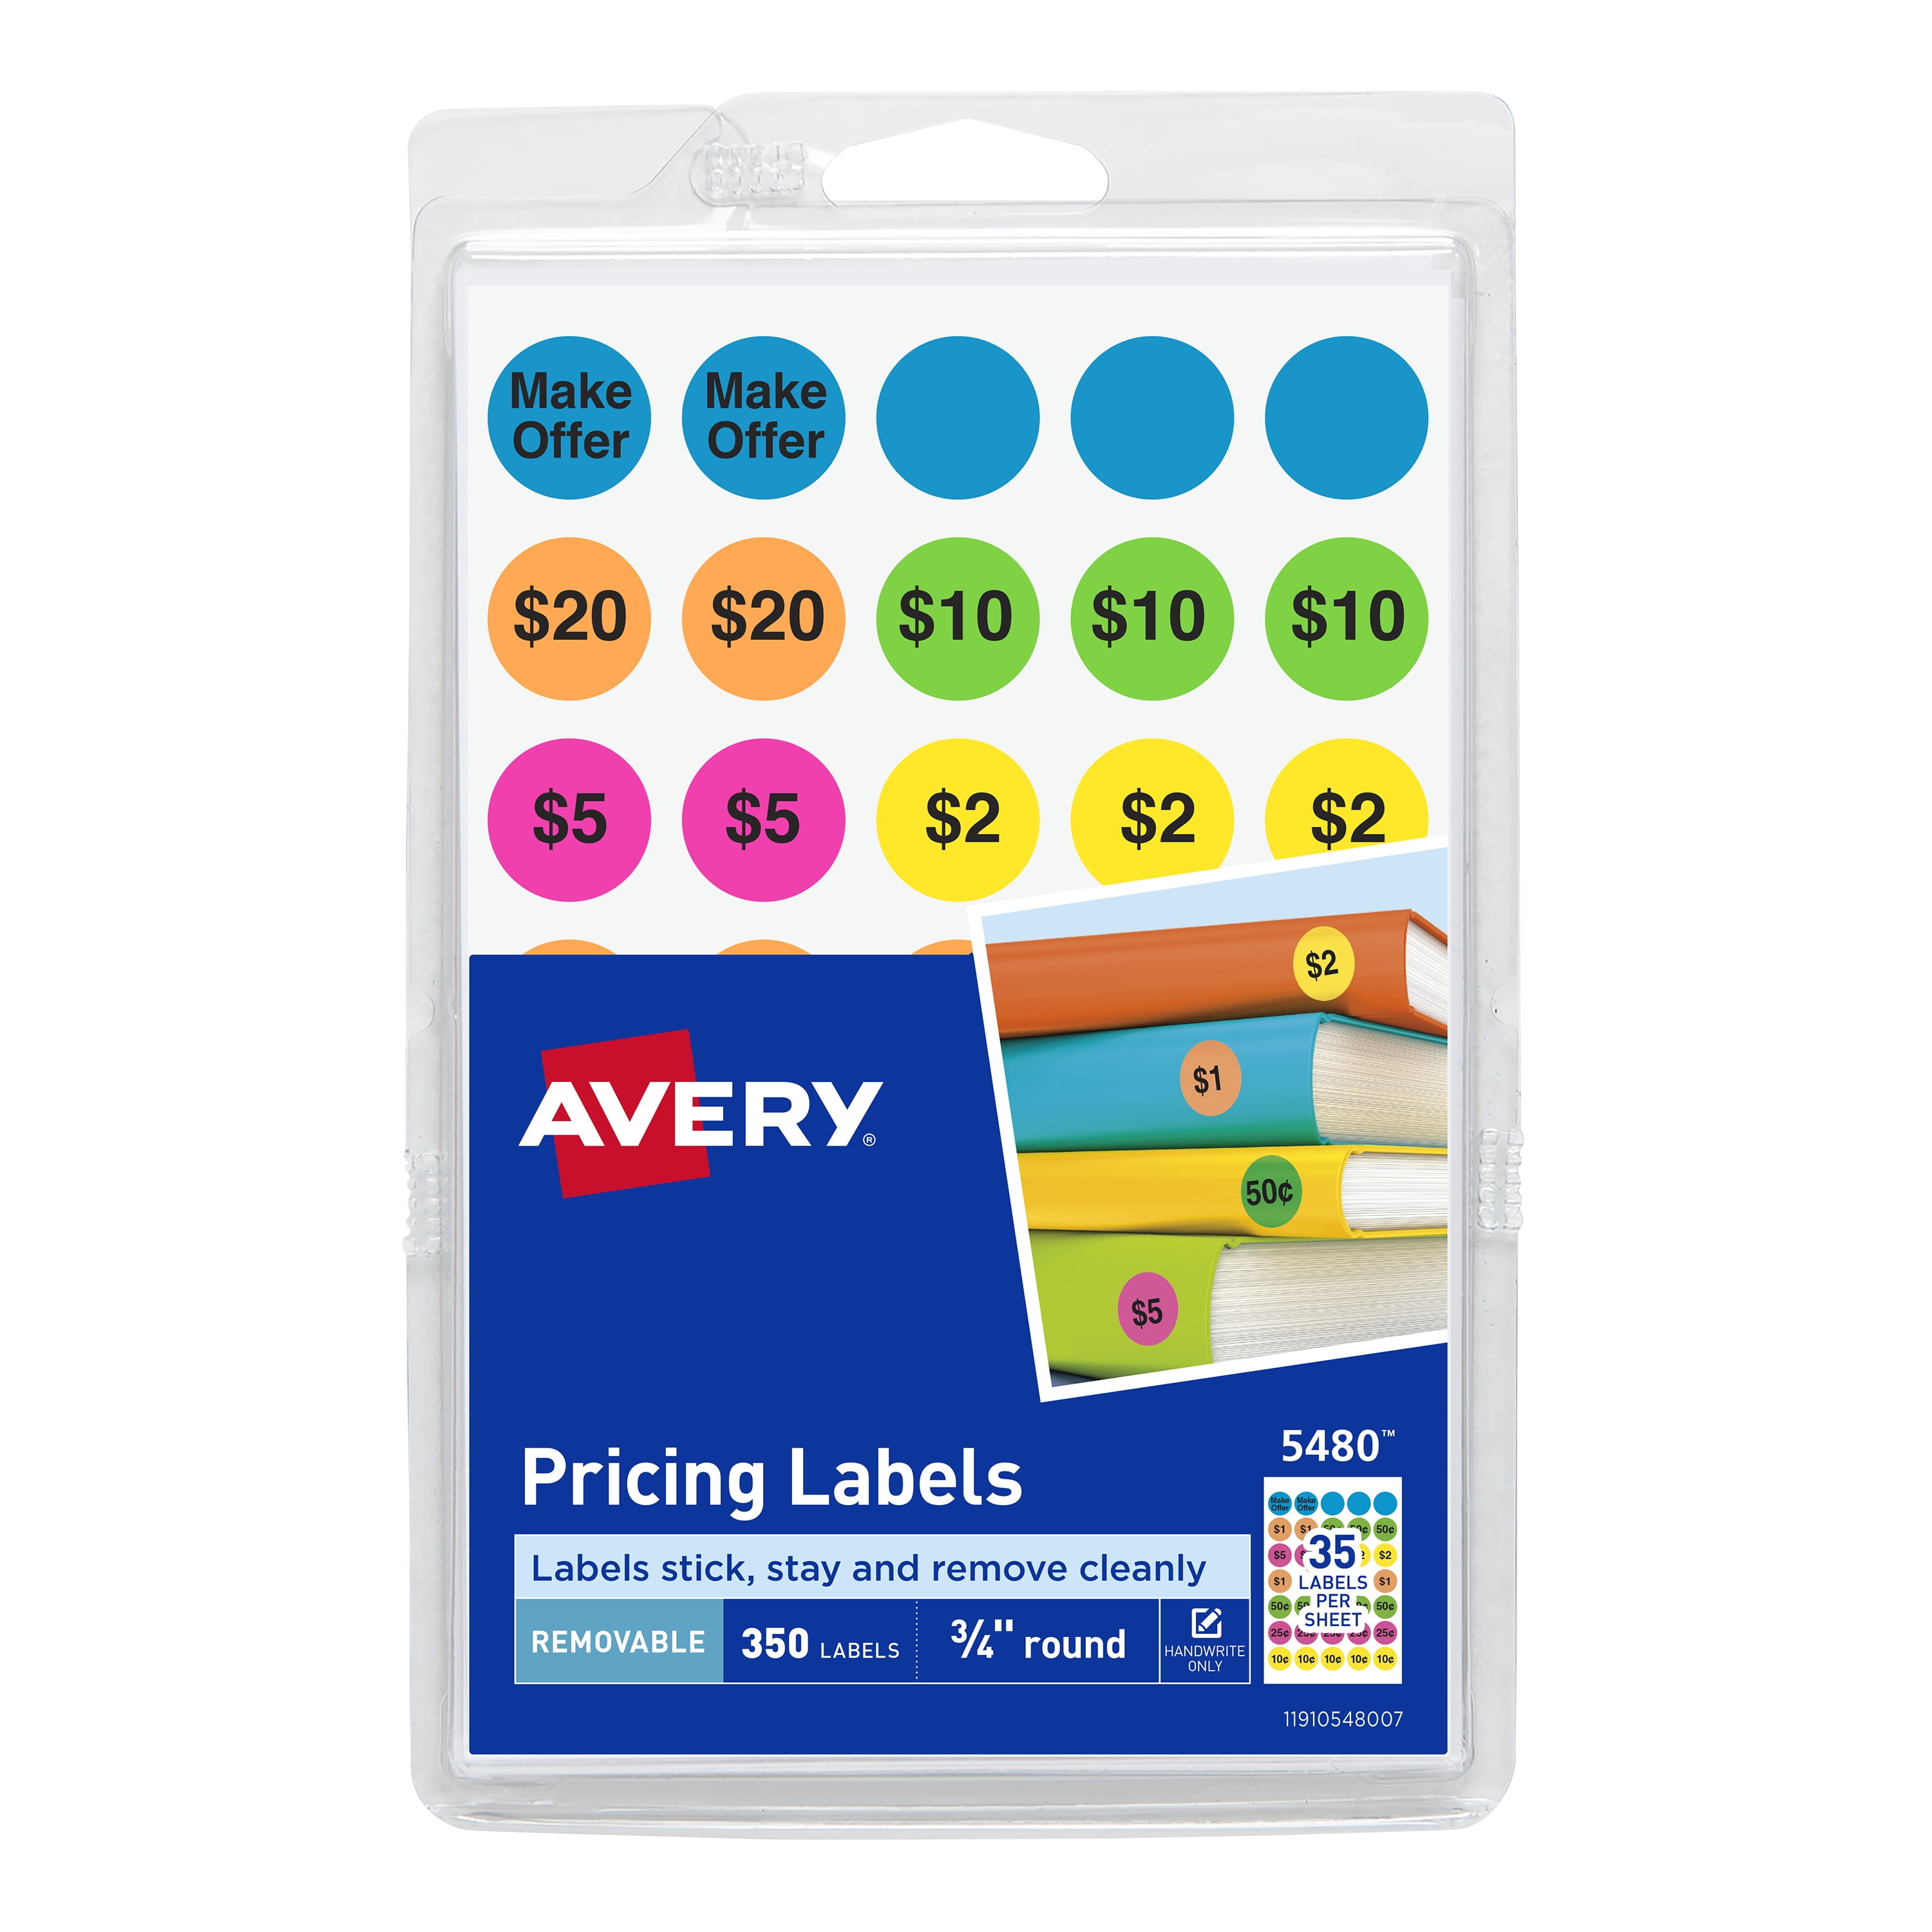 4080 Pcs Garage Sale Price Stickers 3/4 Round Pre-Printed Bright Colors Pricing Sticker Labels 